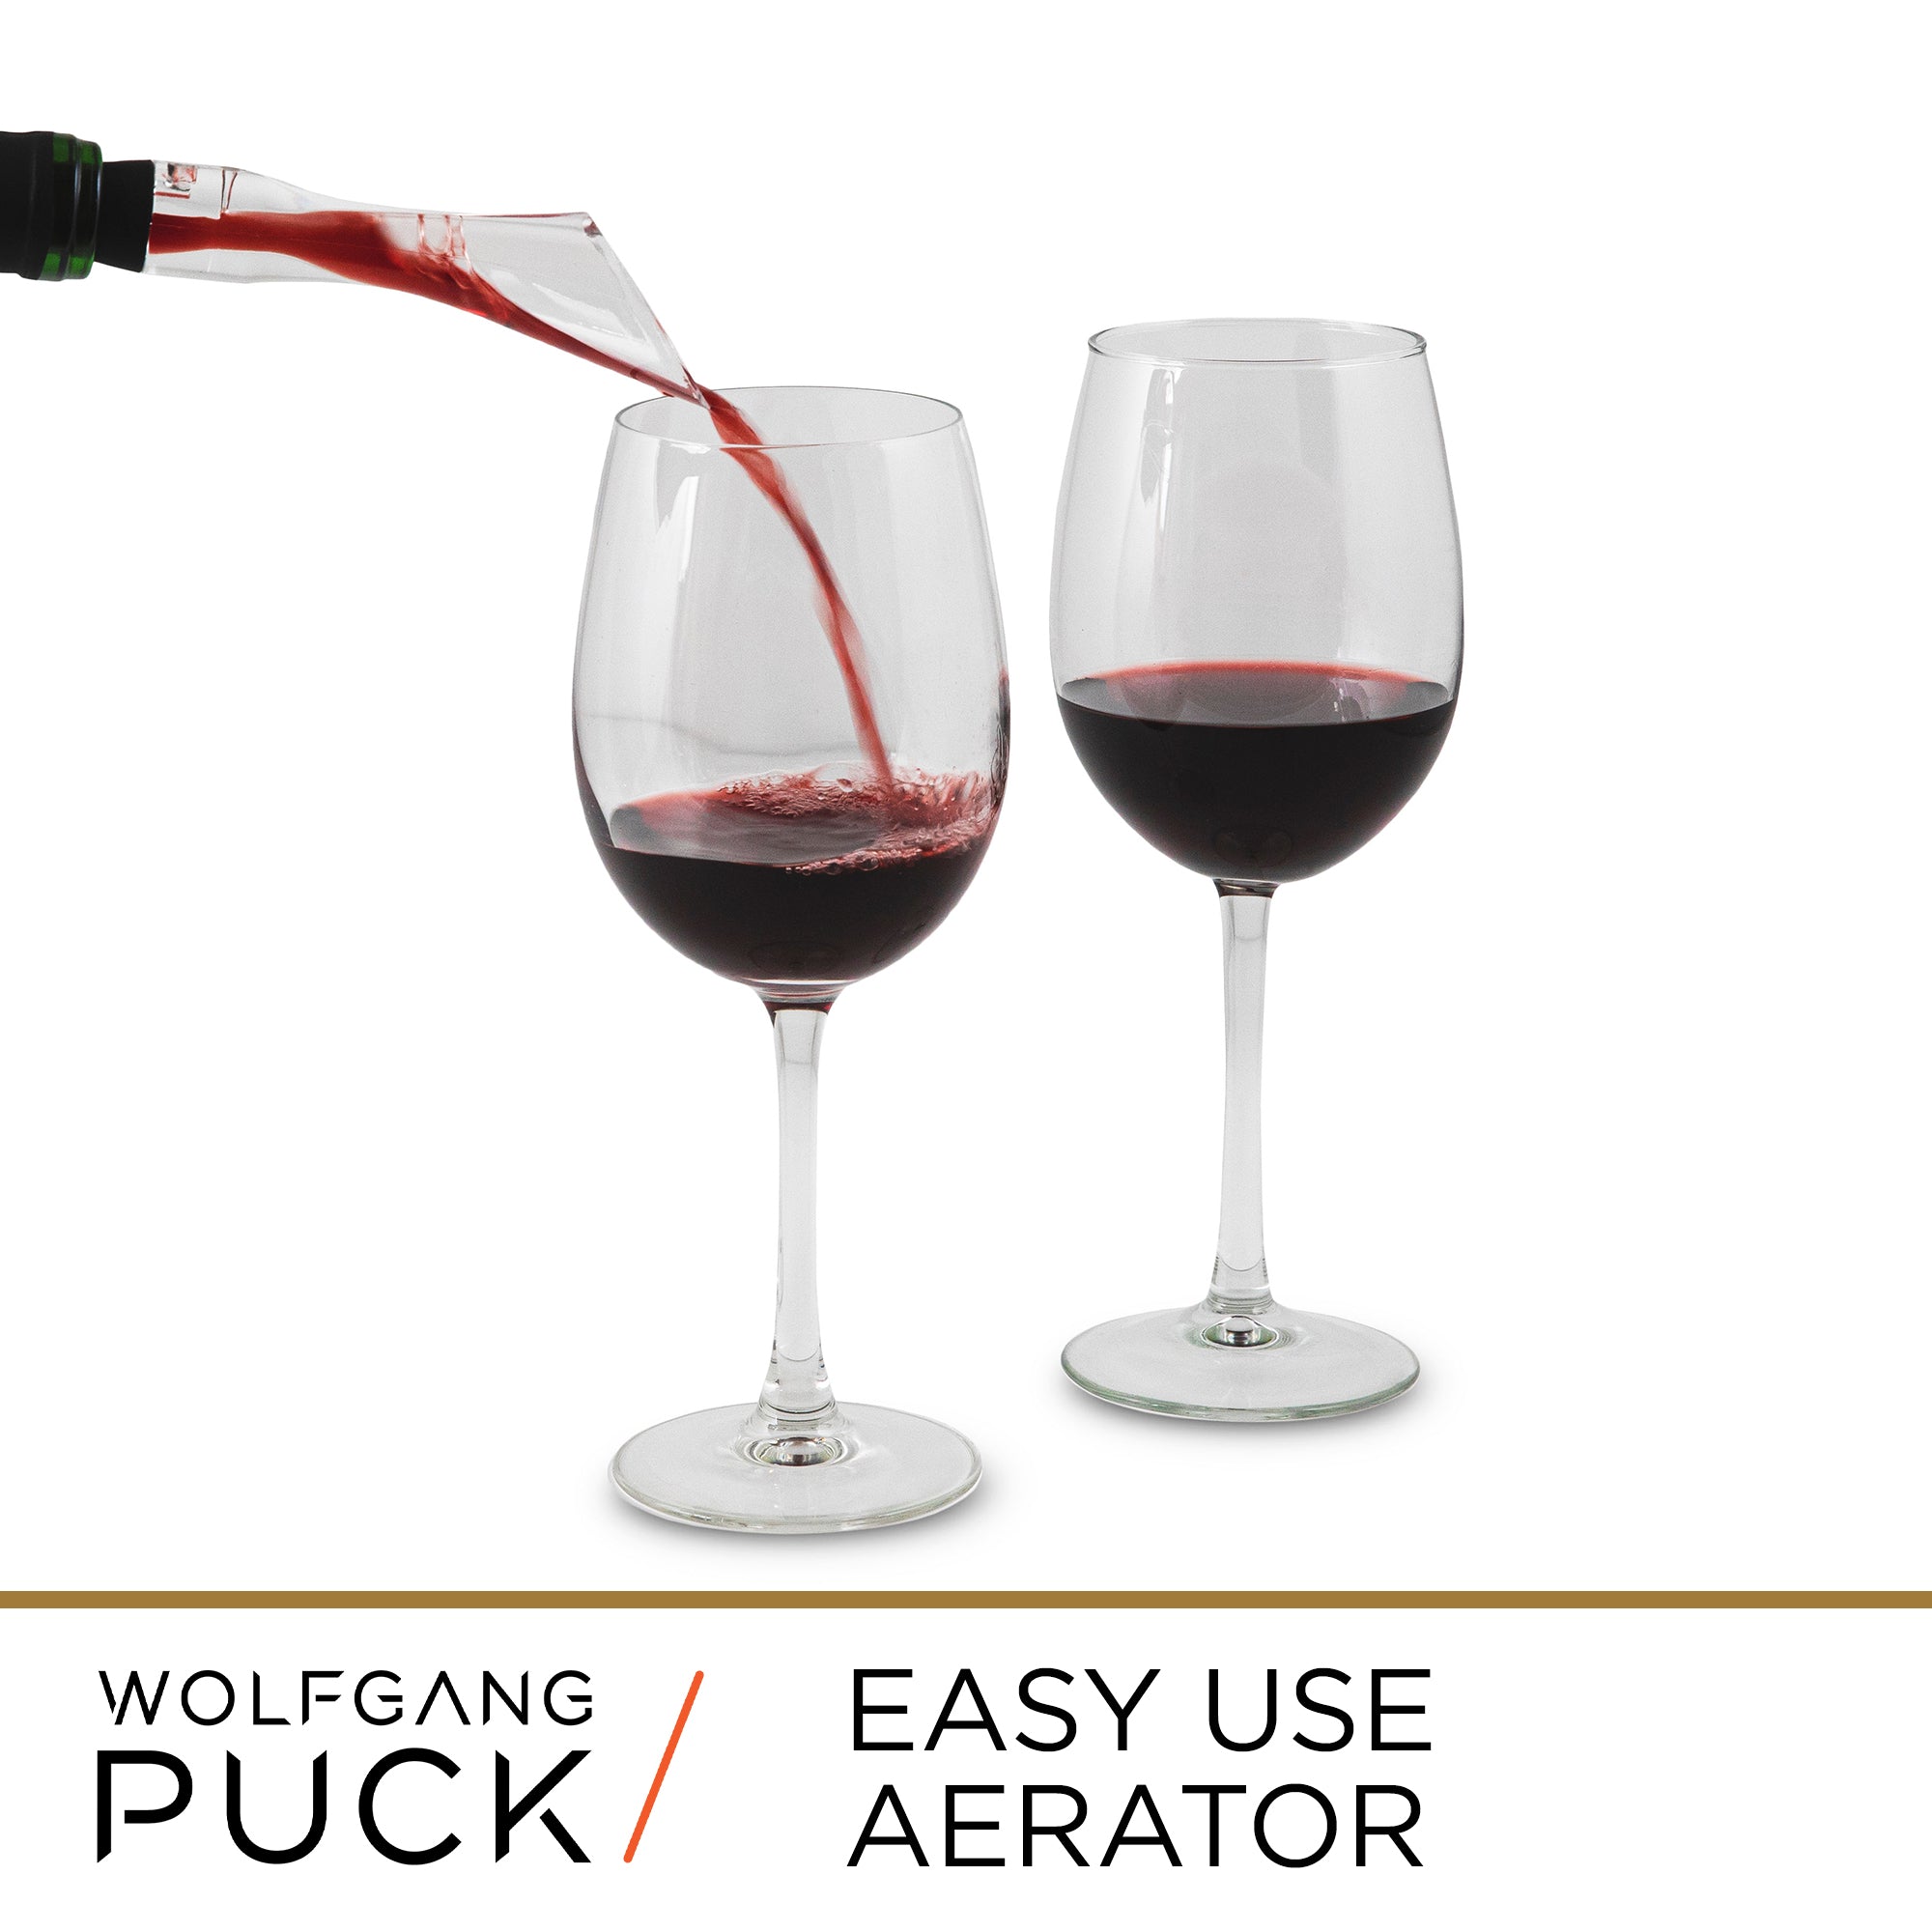 Wolfgang Puck 6-piece wine tool set including aerator